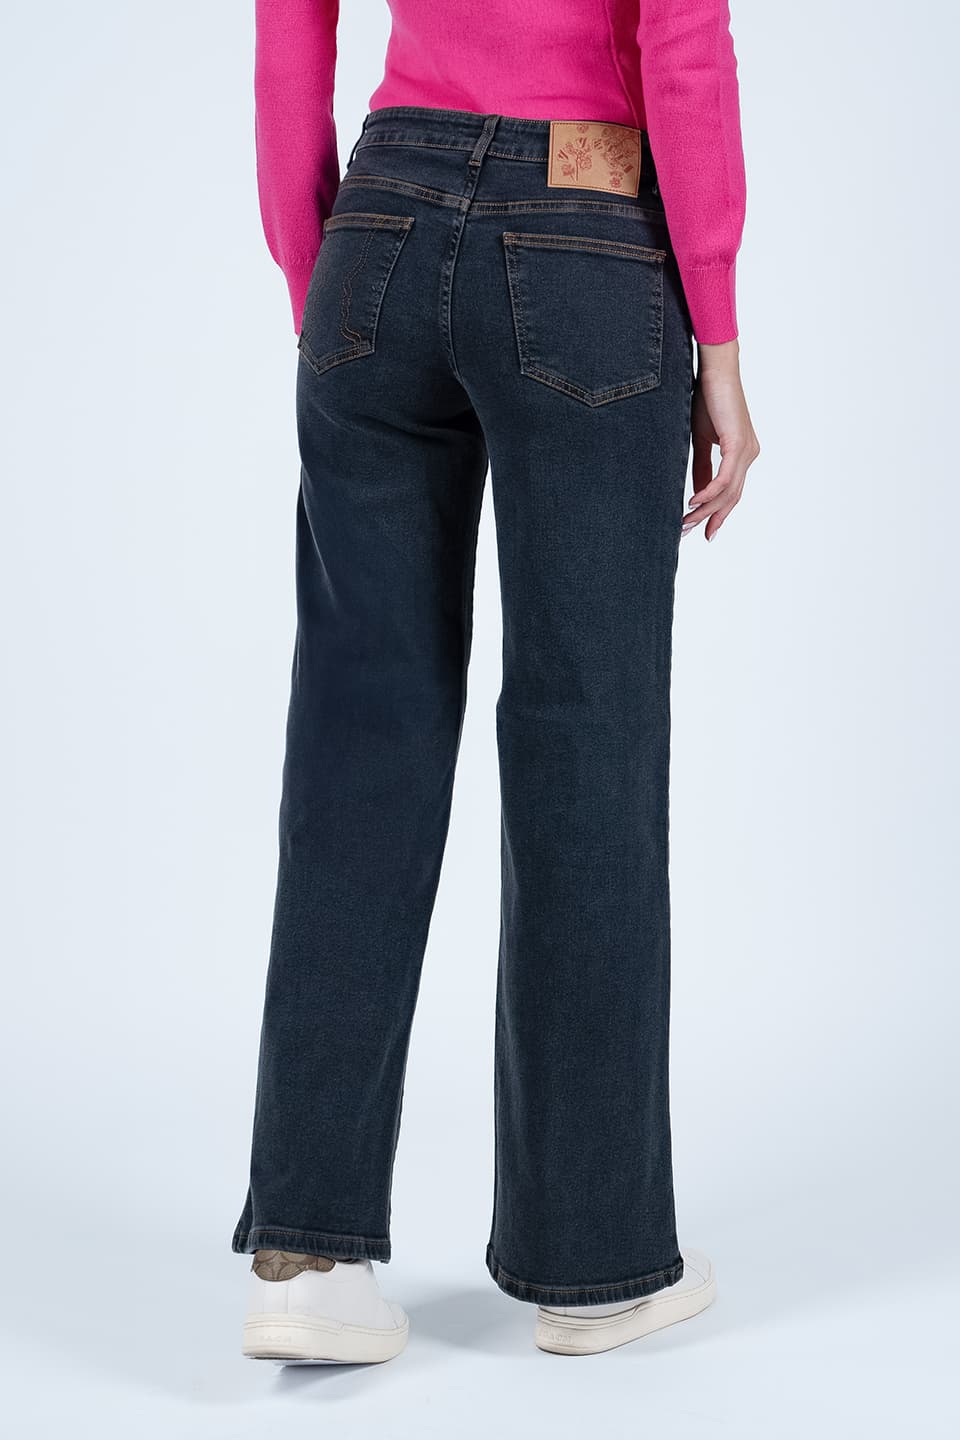 Designer Black Jeans, shop online with free delivery in UAE. Product gallery 3